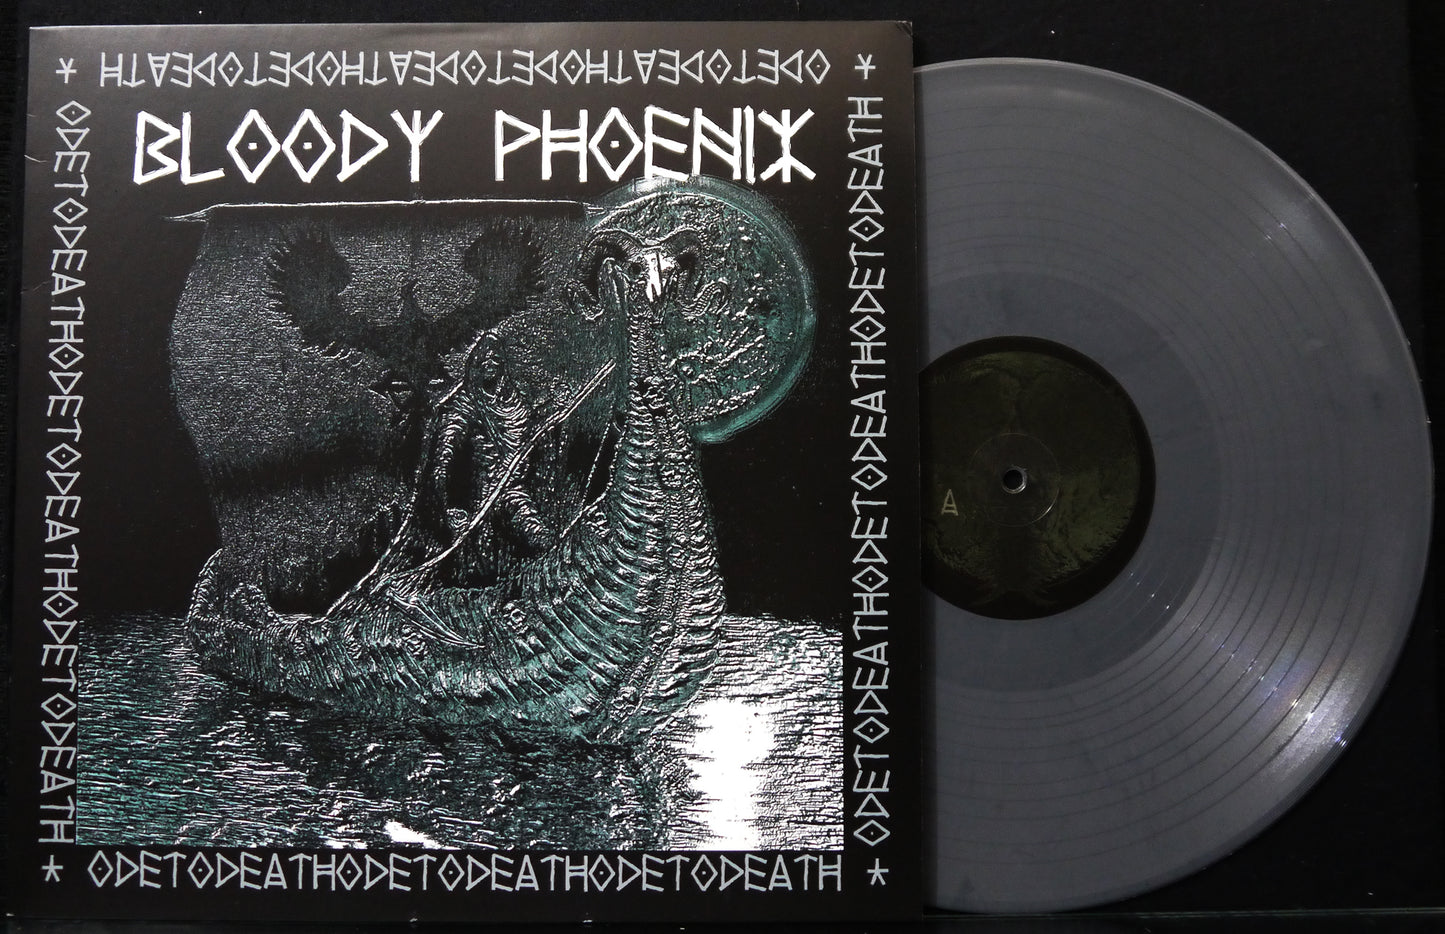 BLOODY PHOENIX - Ode To Death 12"